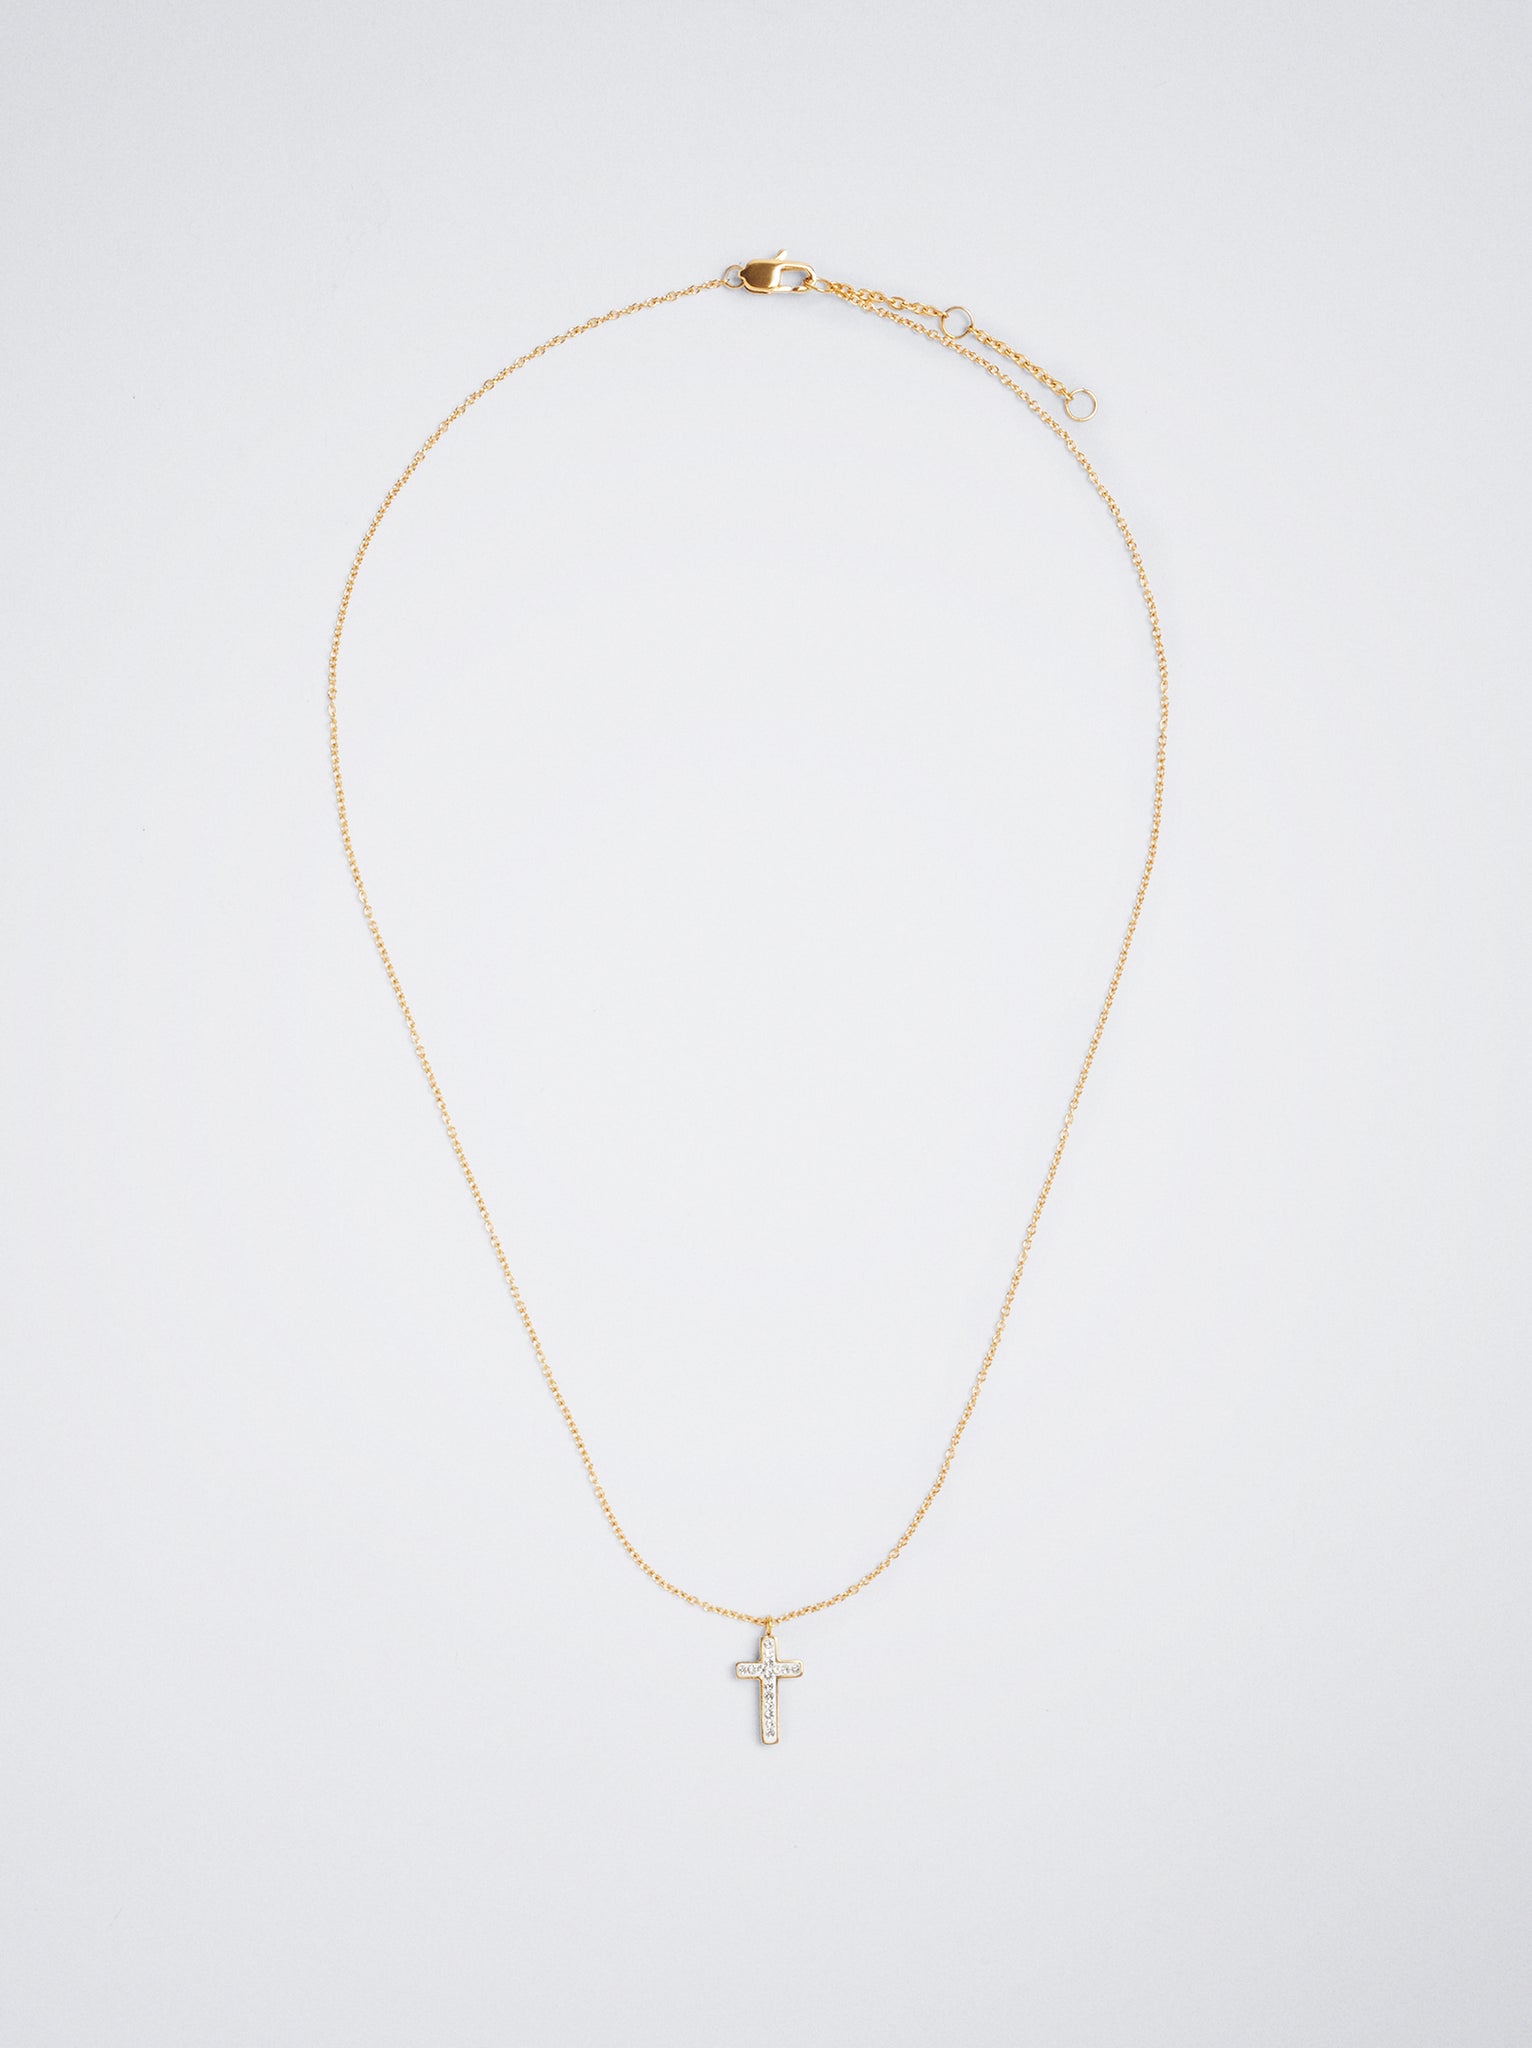 Silver Stainless Steel Necklace With Cross